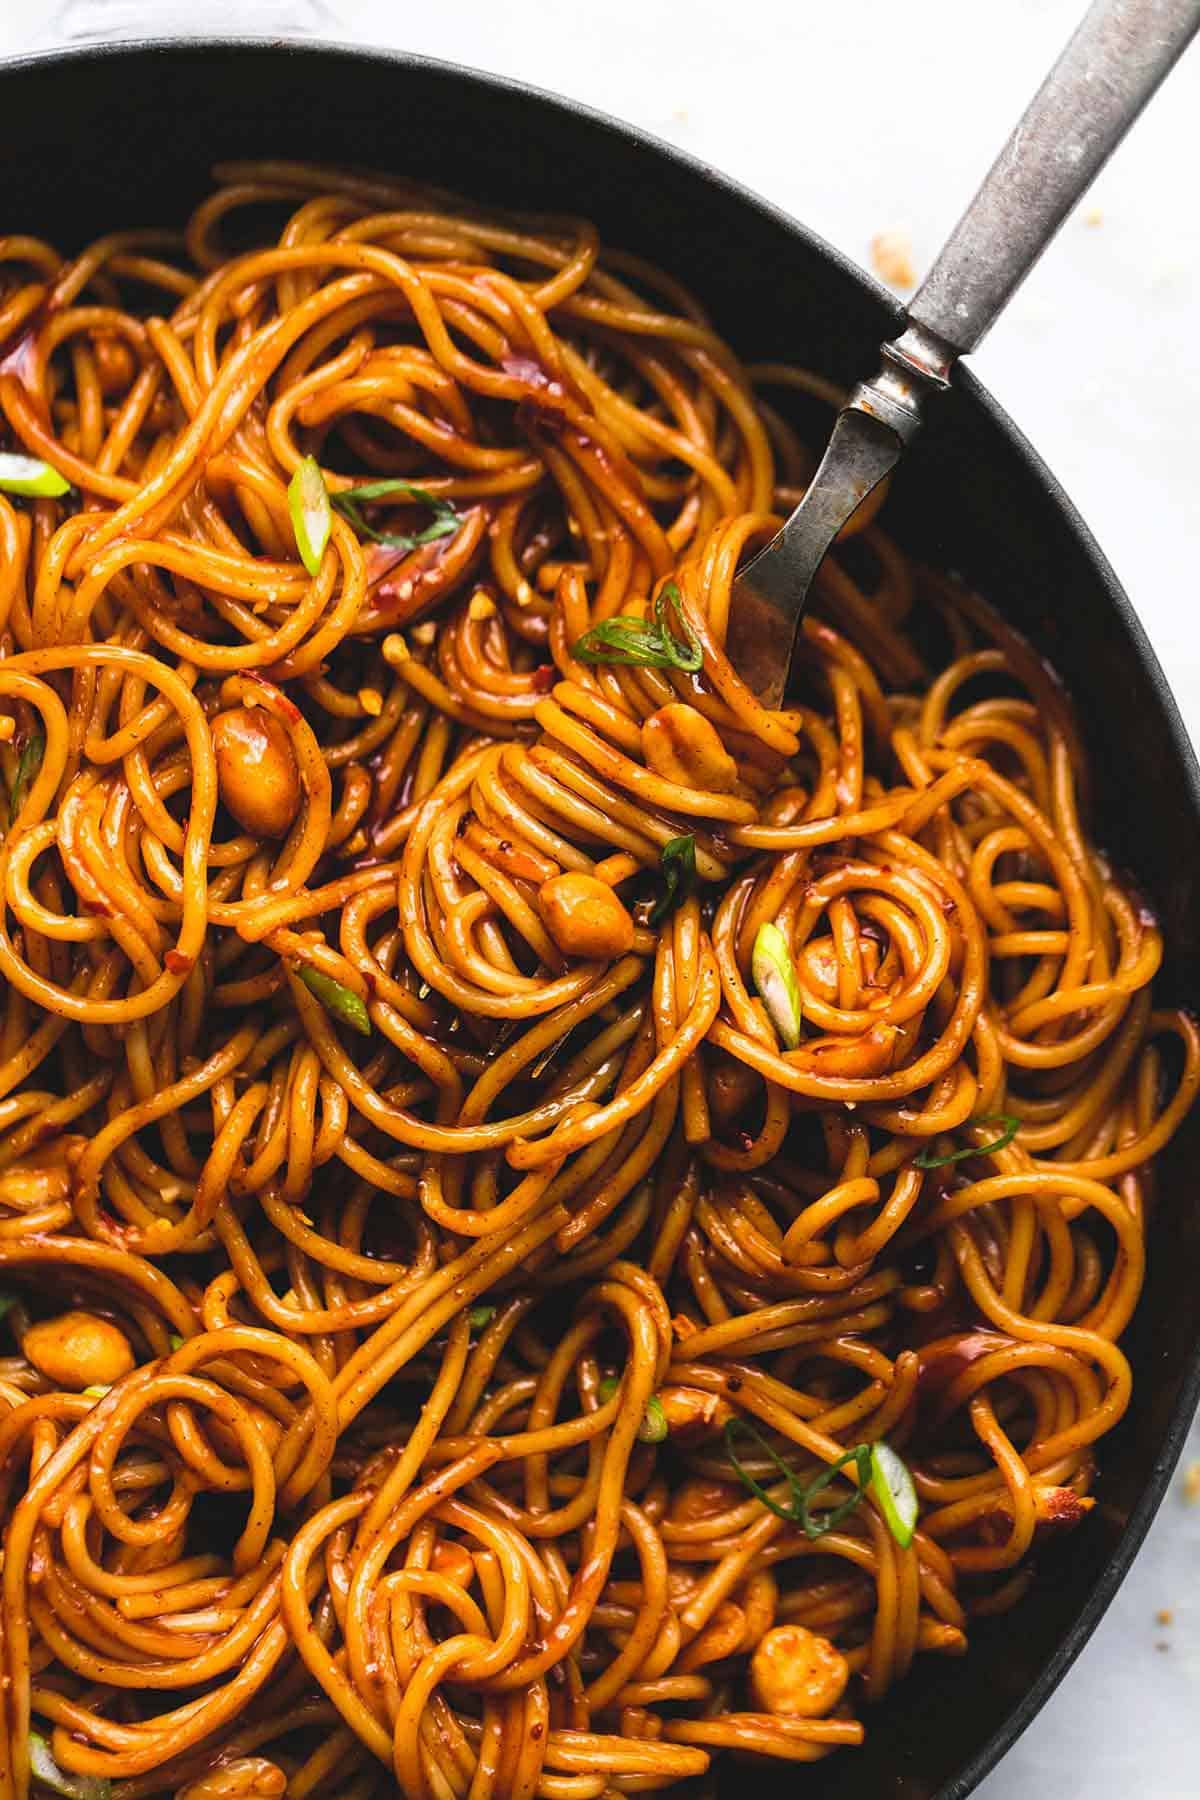 Sweet & Spicy Hot Chili Chicken Noodles